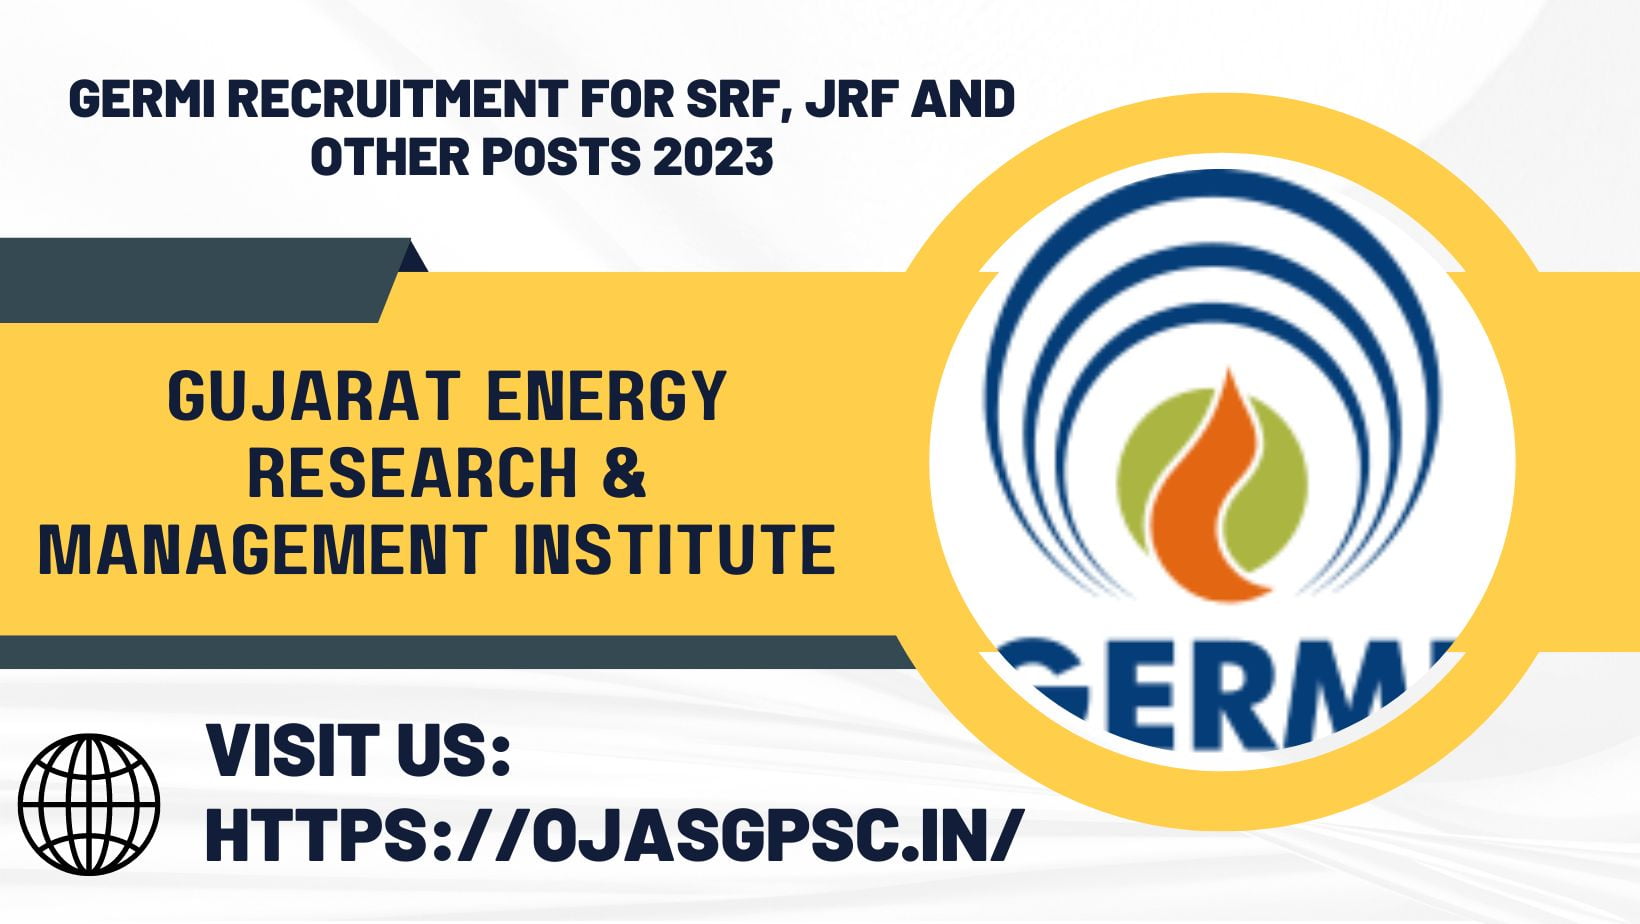 Gujarat Energy Research & Management Institute (GERMI) Recruitment for SRF, JRF and Other Posts 2023